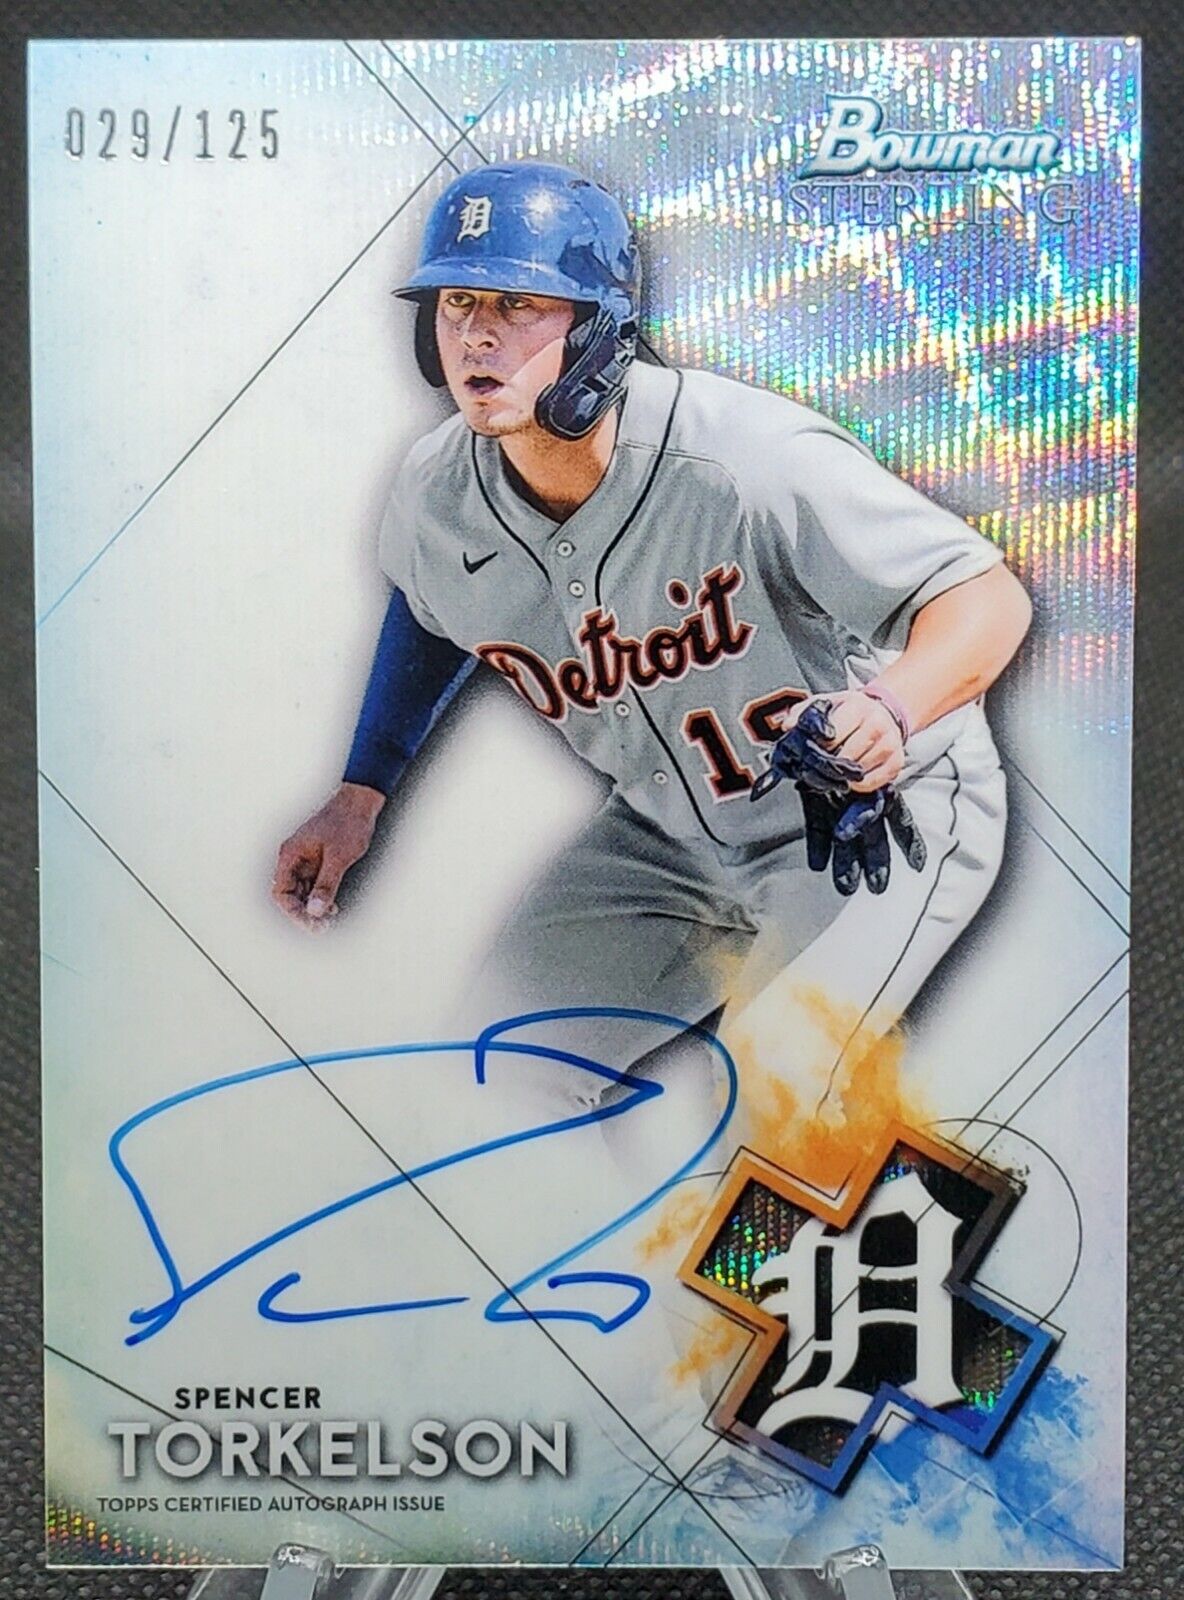 2021 Bowman Sterling Baseball SPENCER TORKELSON Auto Wave Refractor /125  TIGERS